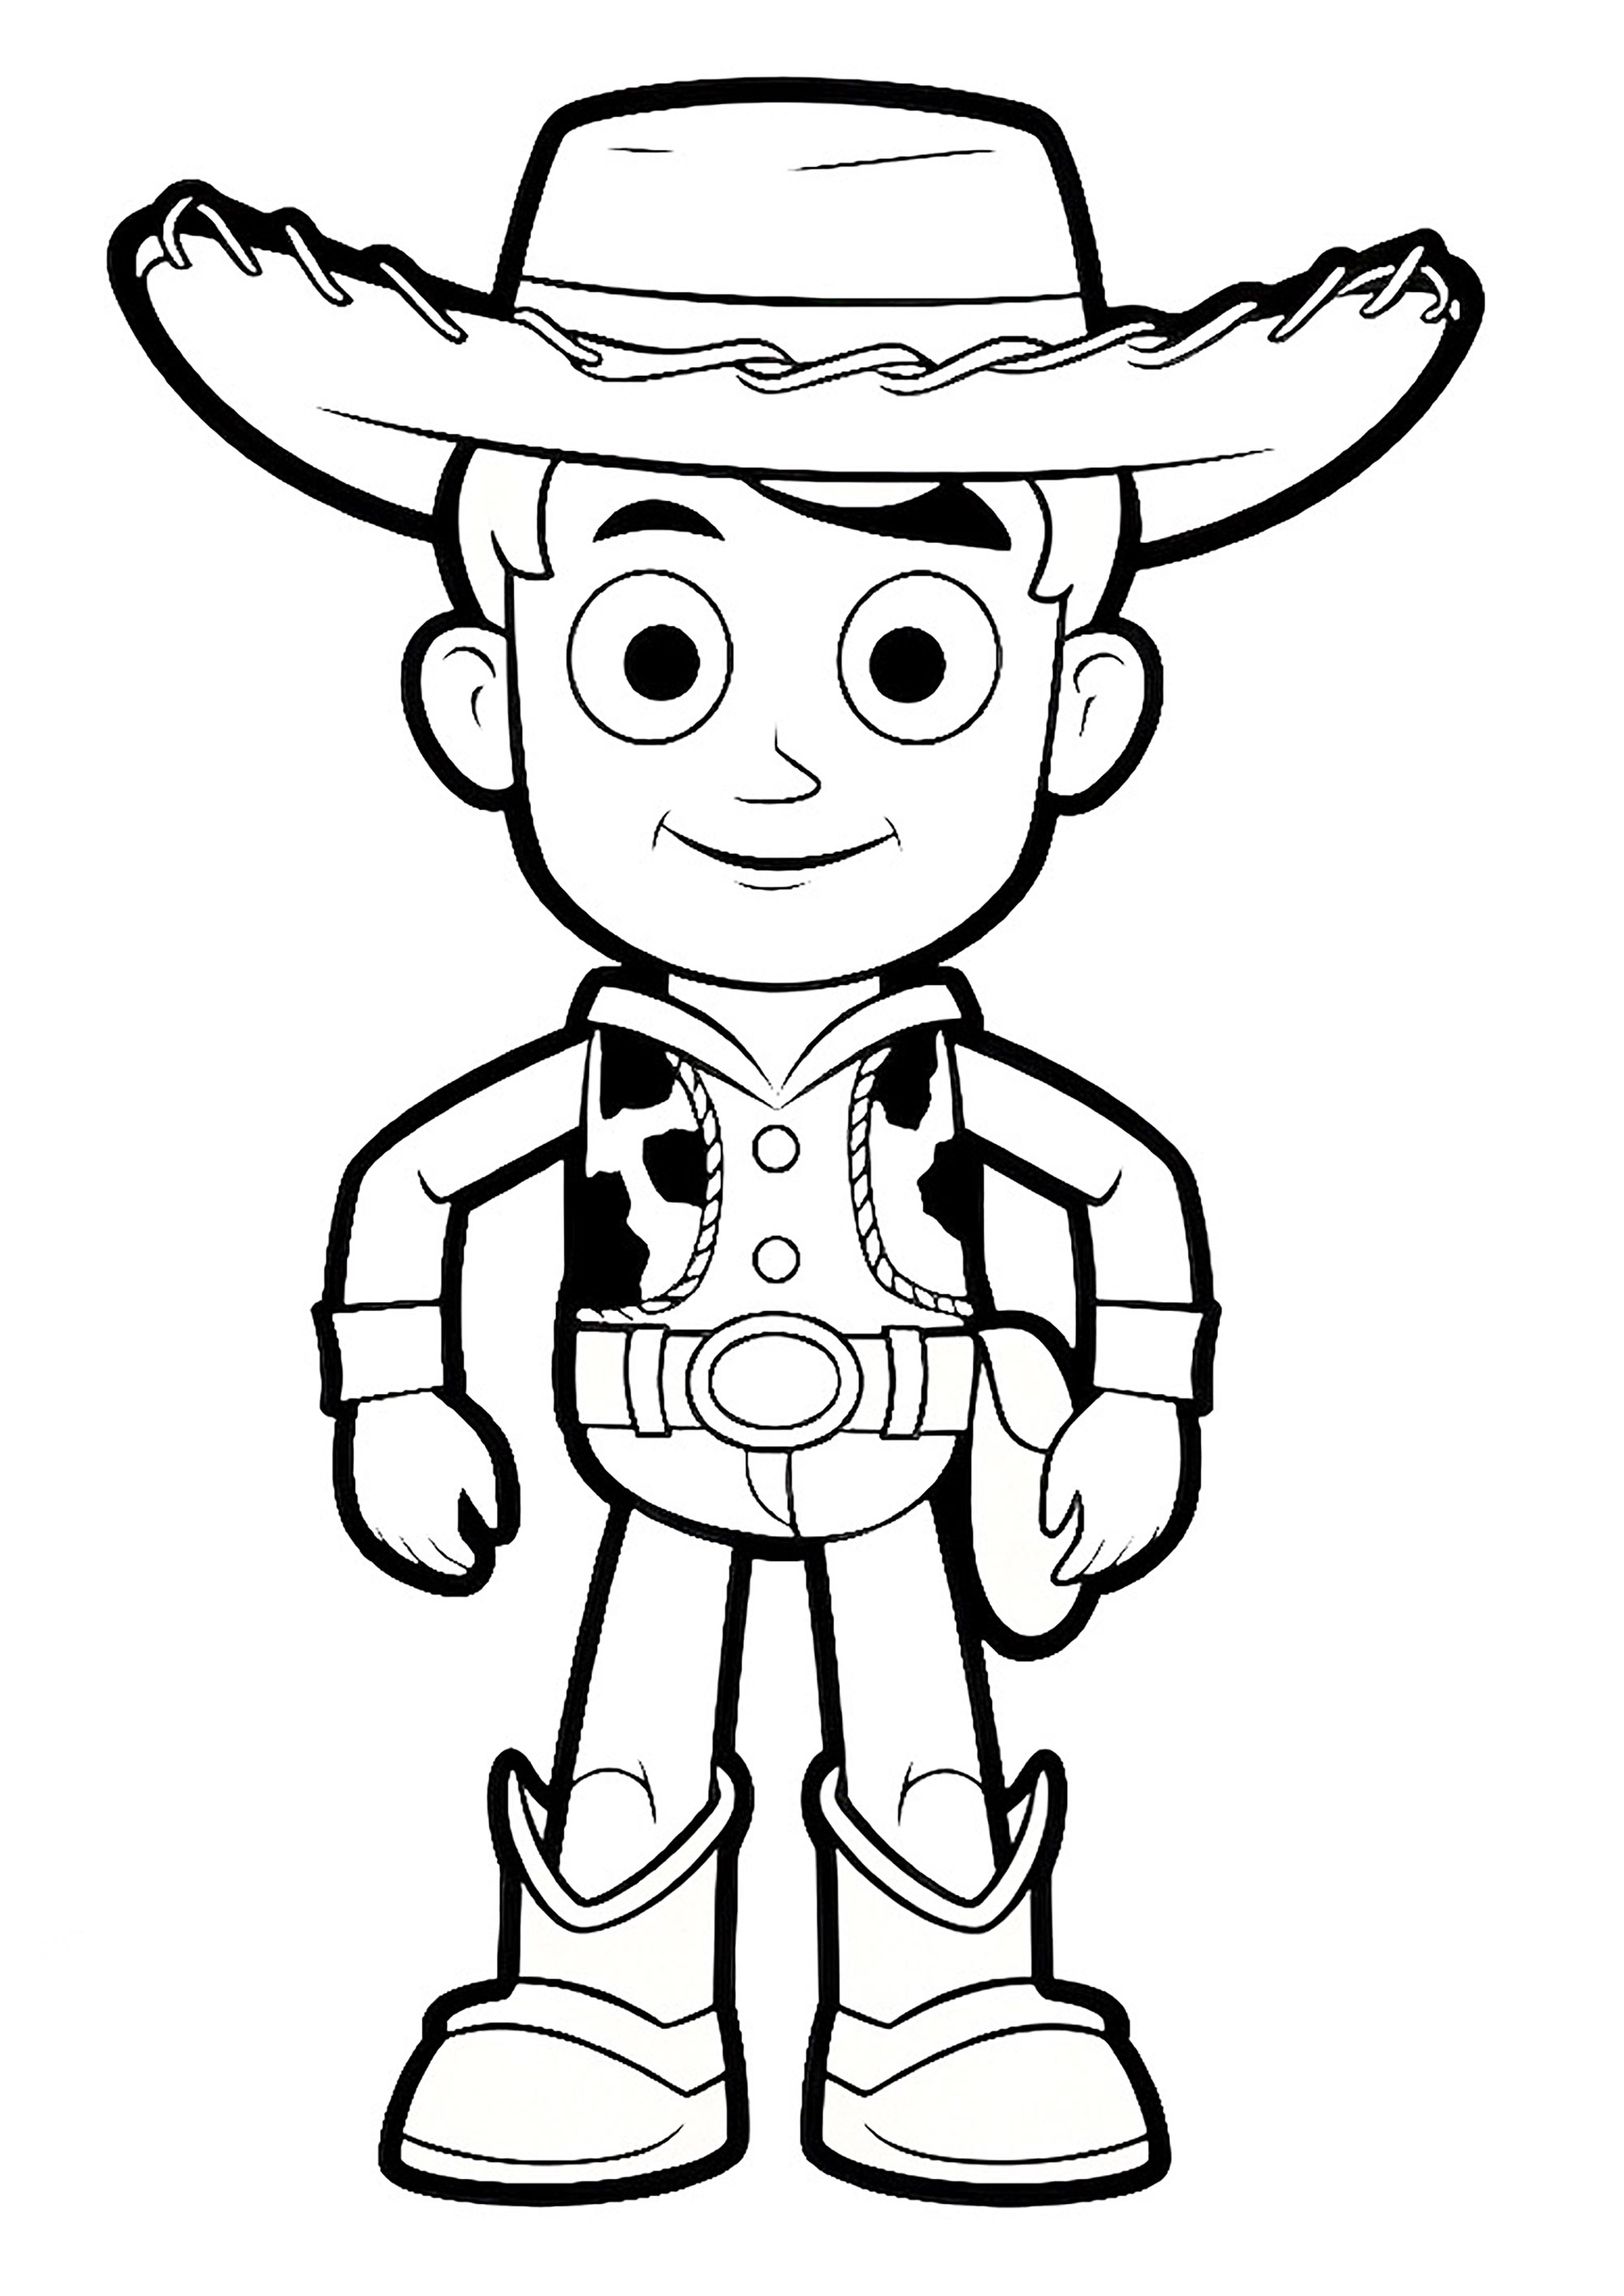 Woody drawn in a very childlike style - Toy Story Kids Coloring Pages